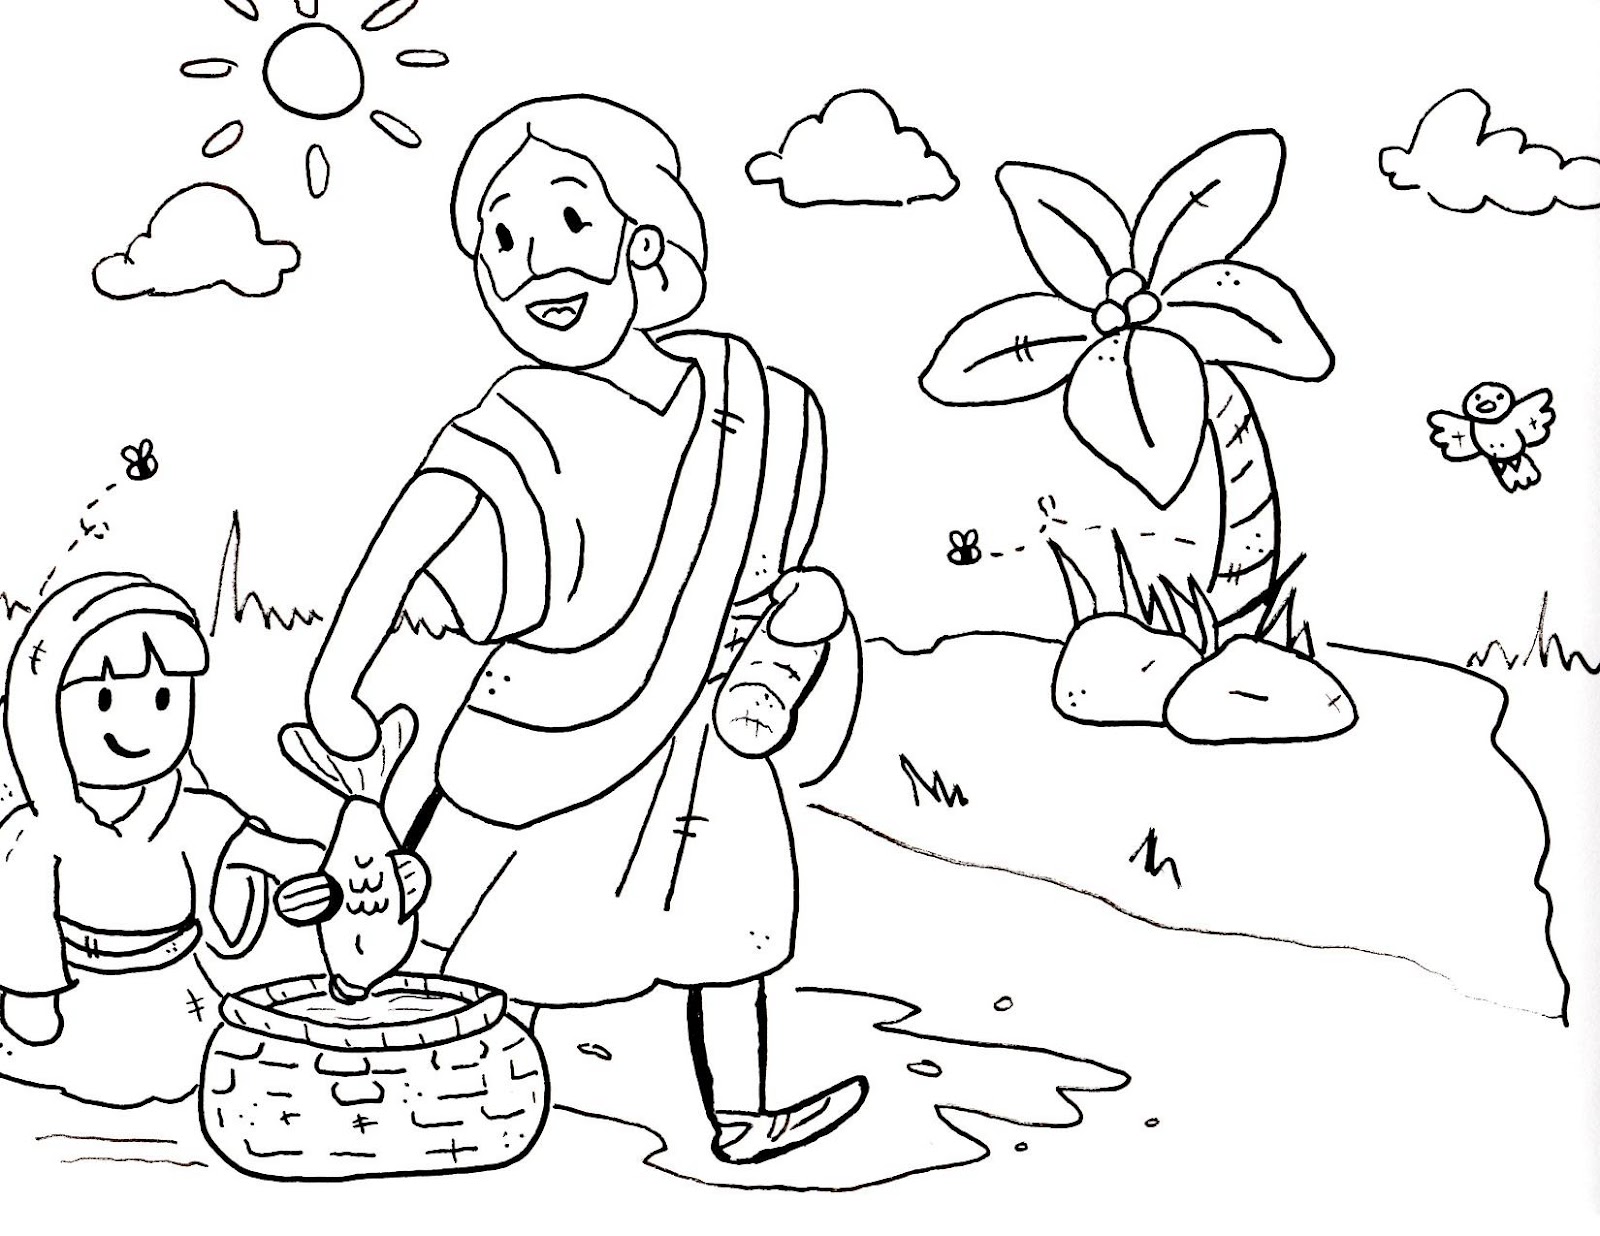 Free Printable Christian Coloring Pages For Preschoolers at GetDrawings